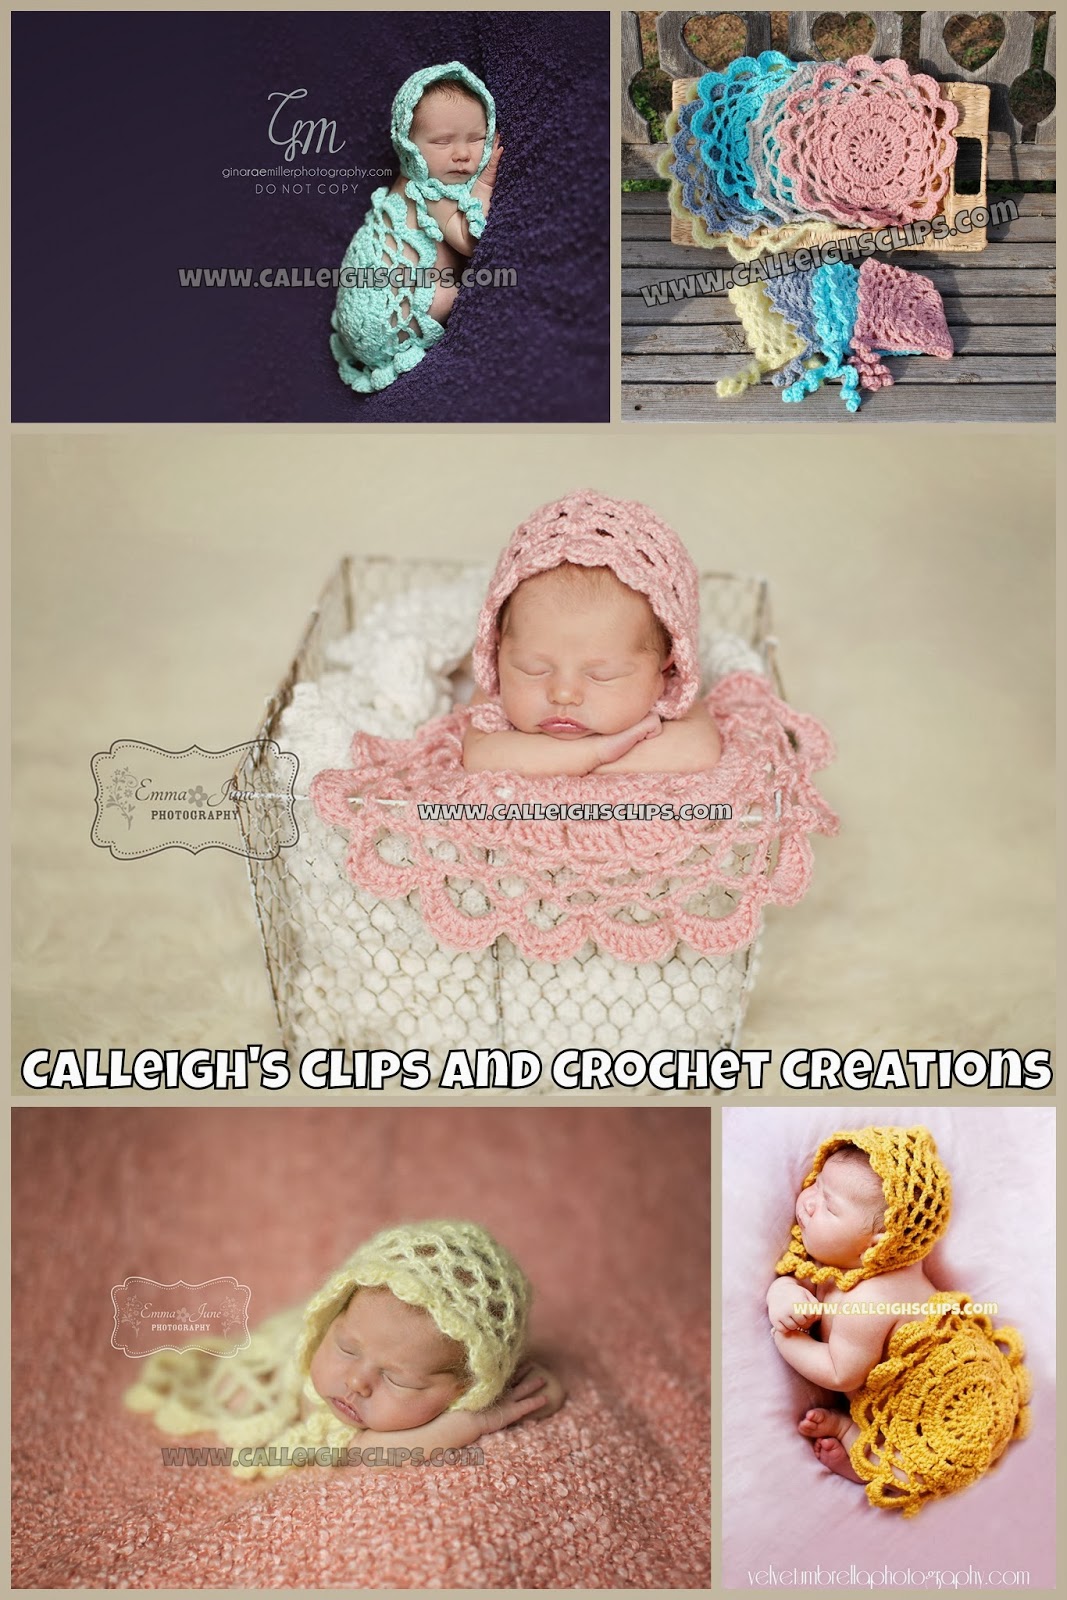 Calleigh's Clips & Crochet Creations: New- Heirloom Hearts Tiara and ...